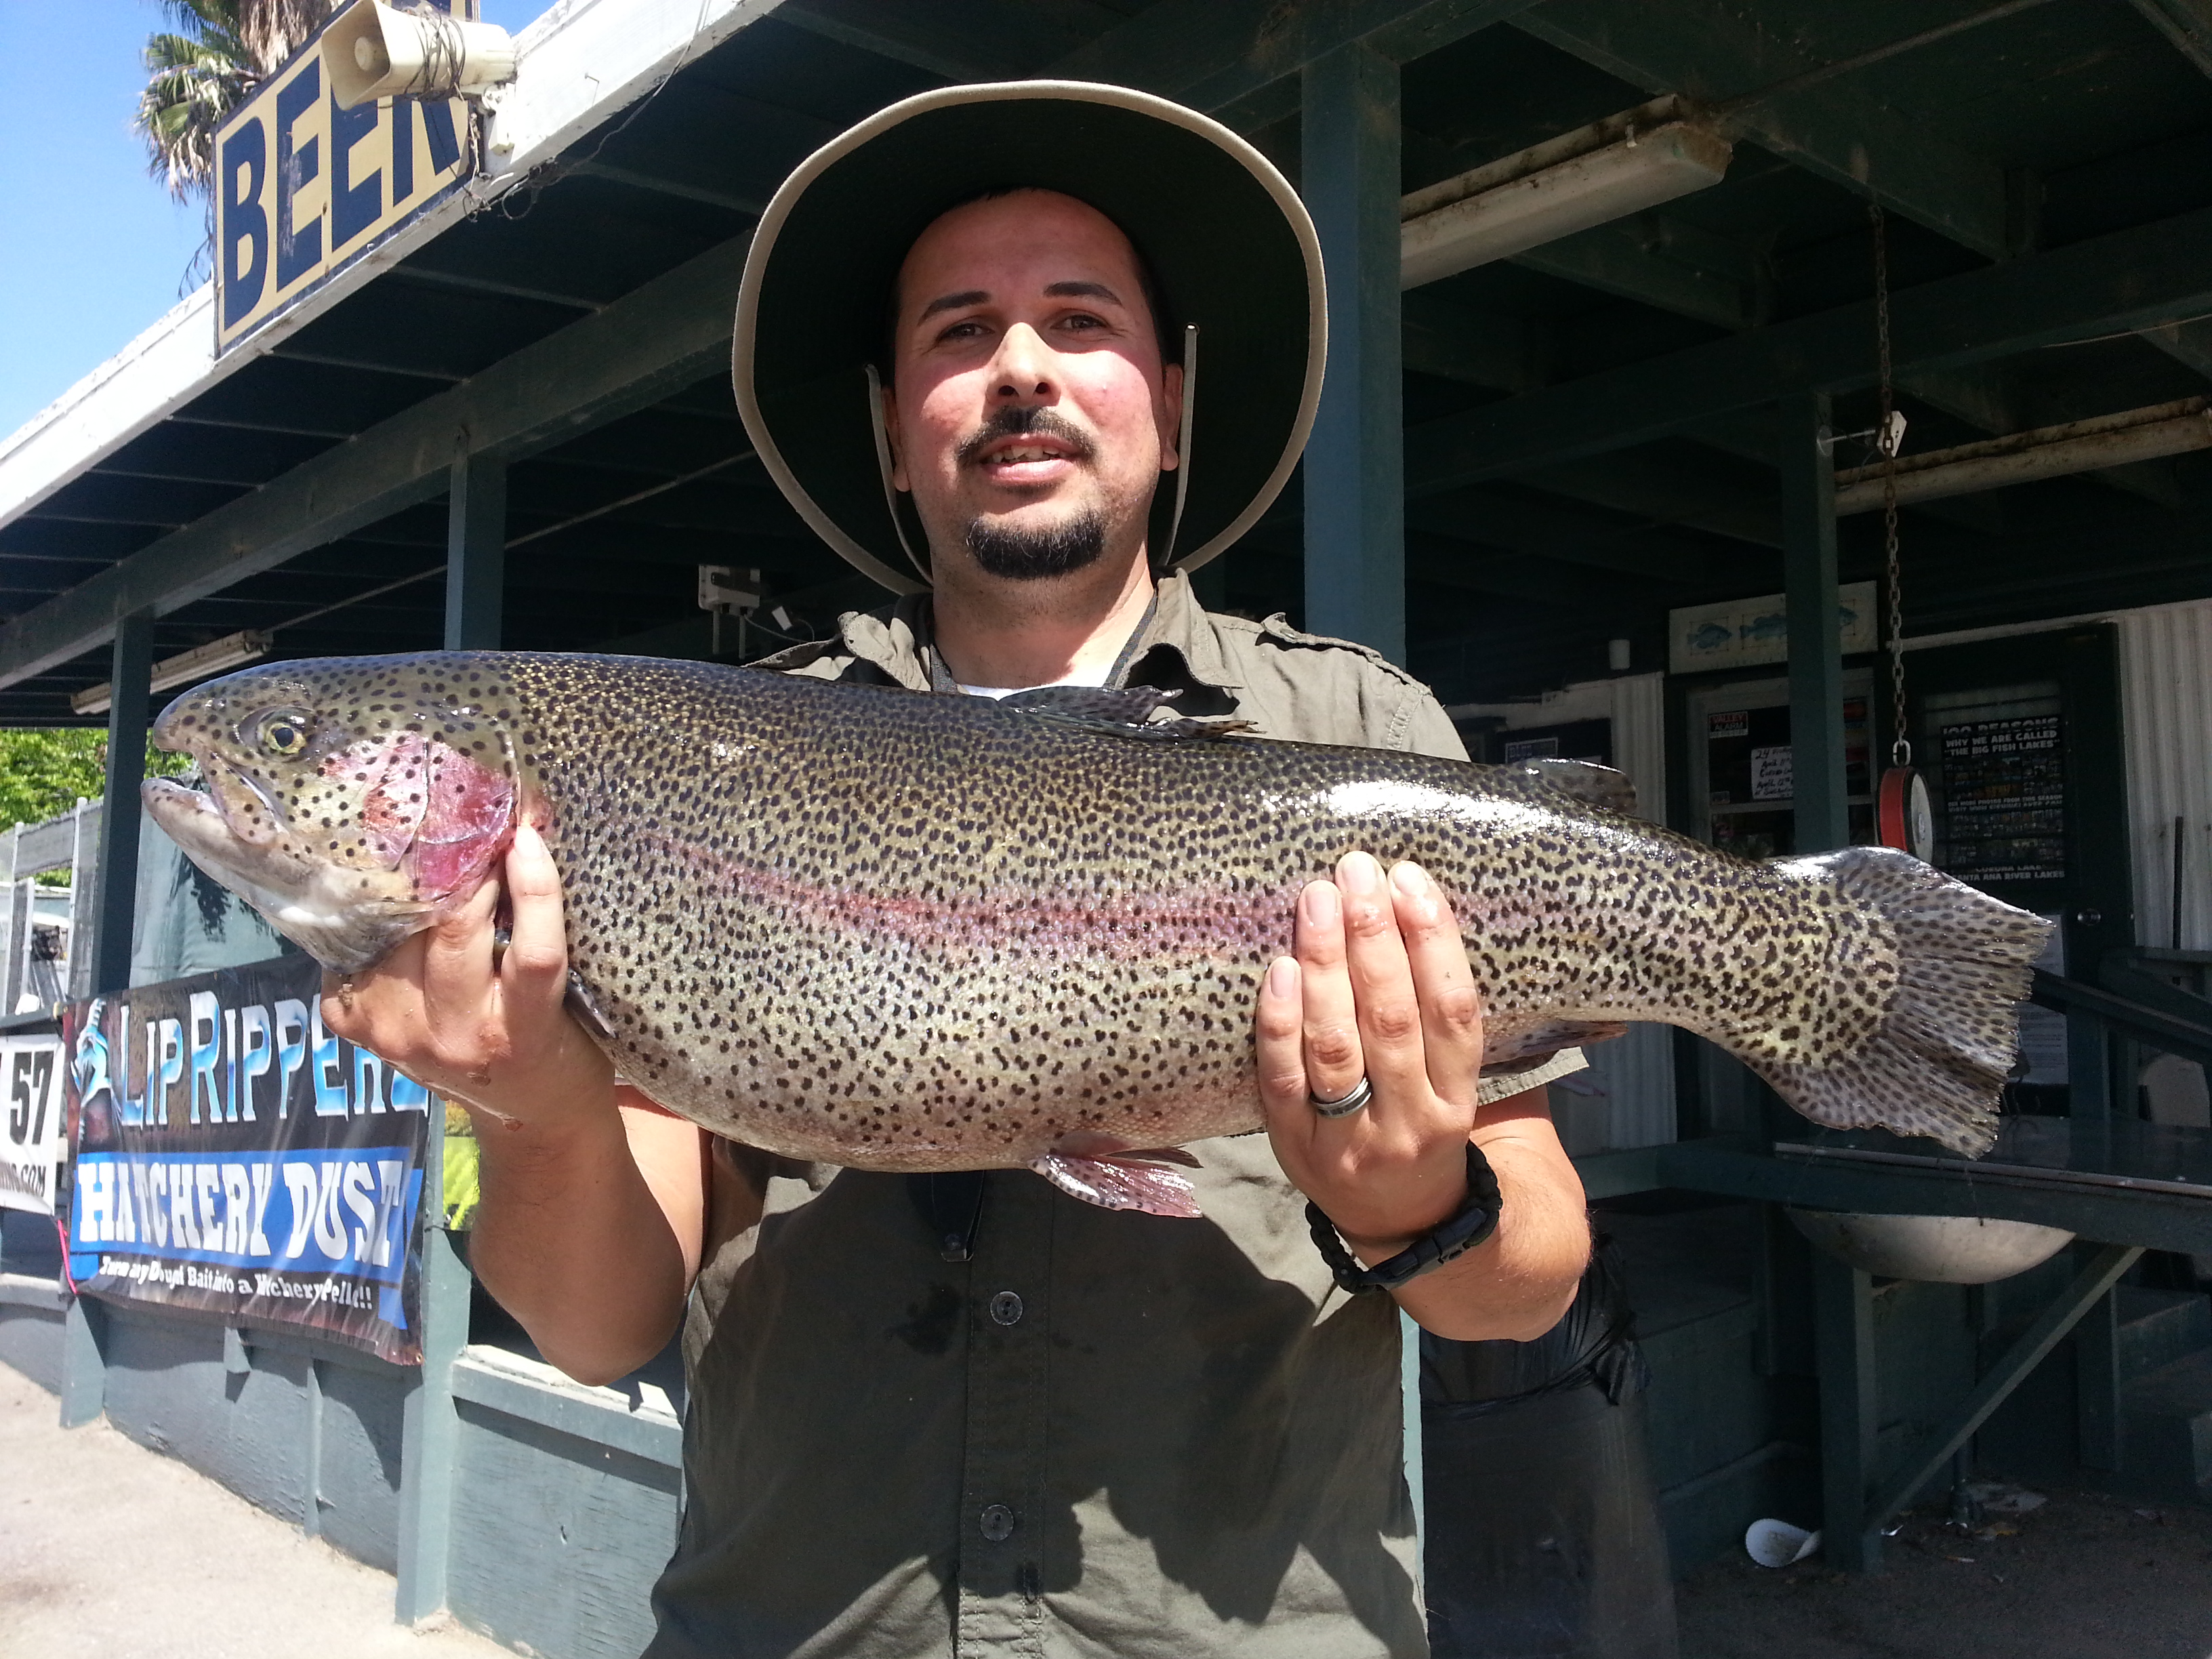 https://www.fishinglakes.com/wp-content/uploads/2014/04/Joaquin-Vizcarra-of-Bellflower-caught-5-trout-totaling-15-pounds-8-ounces-his-heaviest-trout-weighed-in-at-11-pounds-fishing-from-shore-at-the-pump-house.jpg